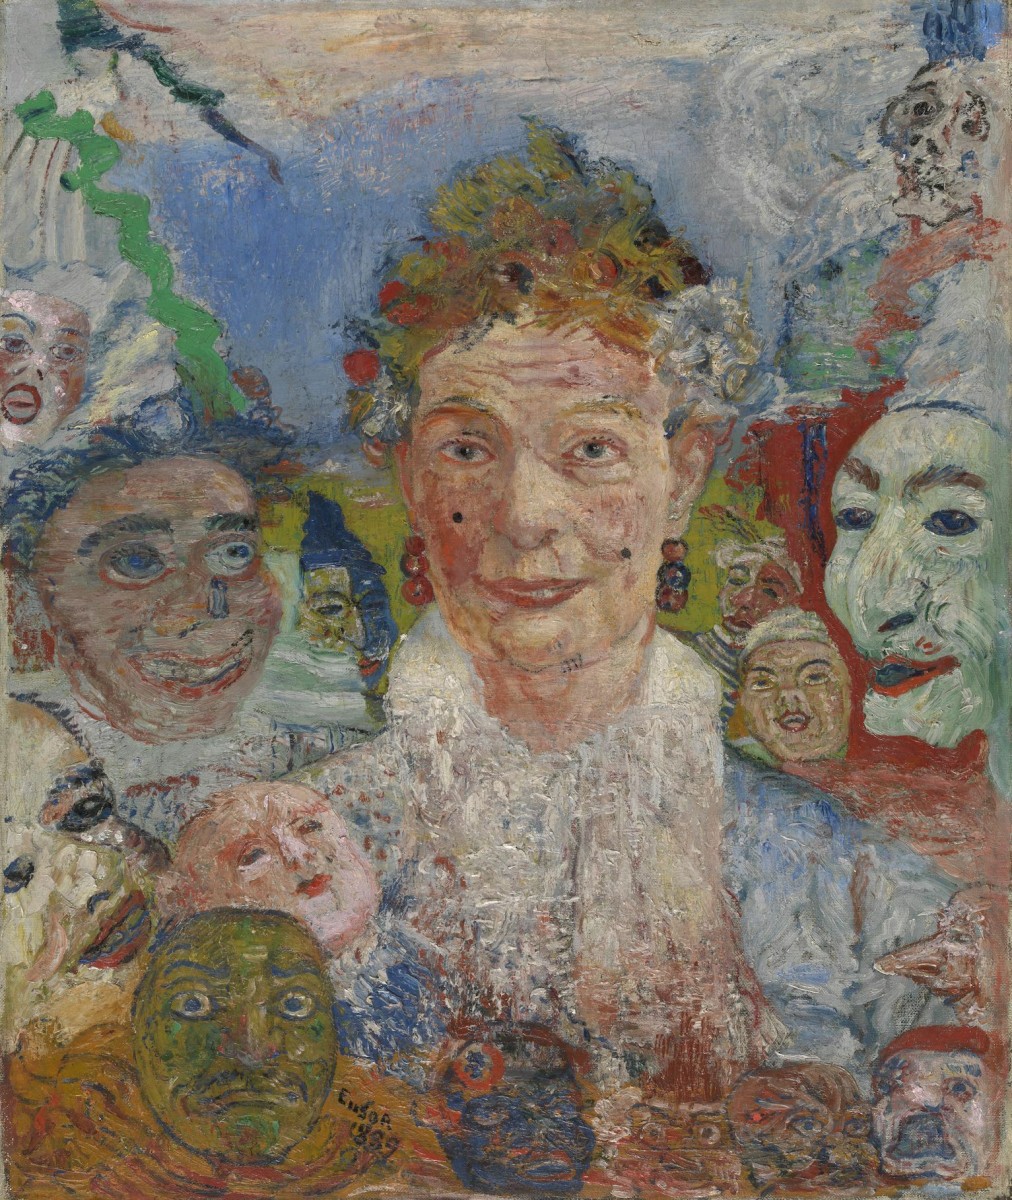 James Ensor, The old lady with masks